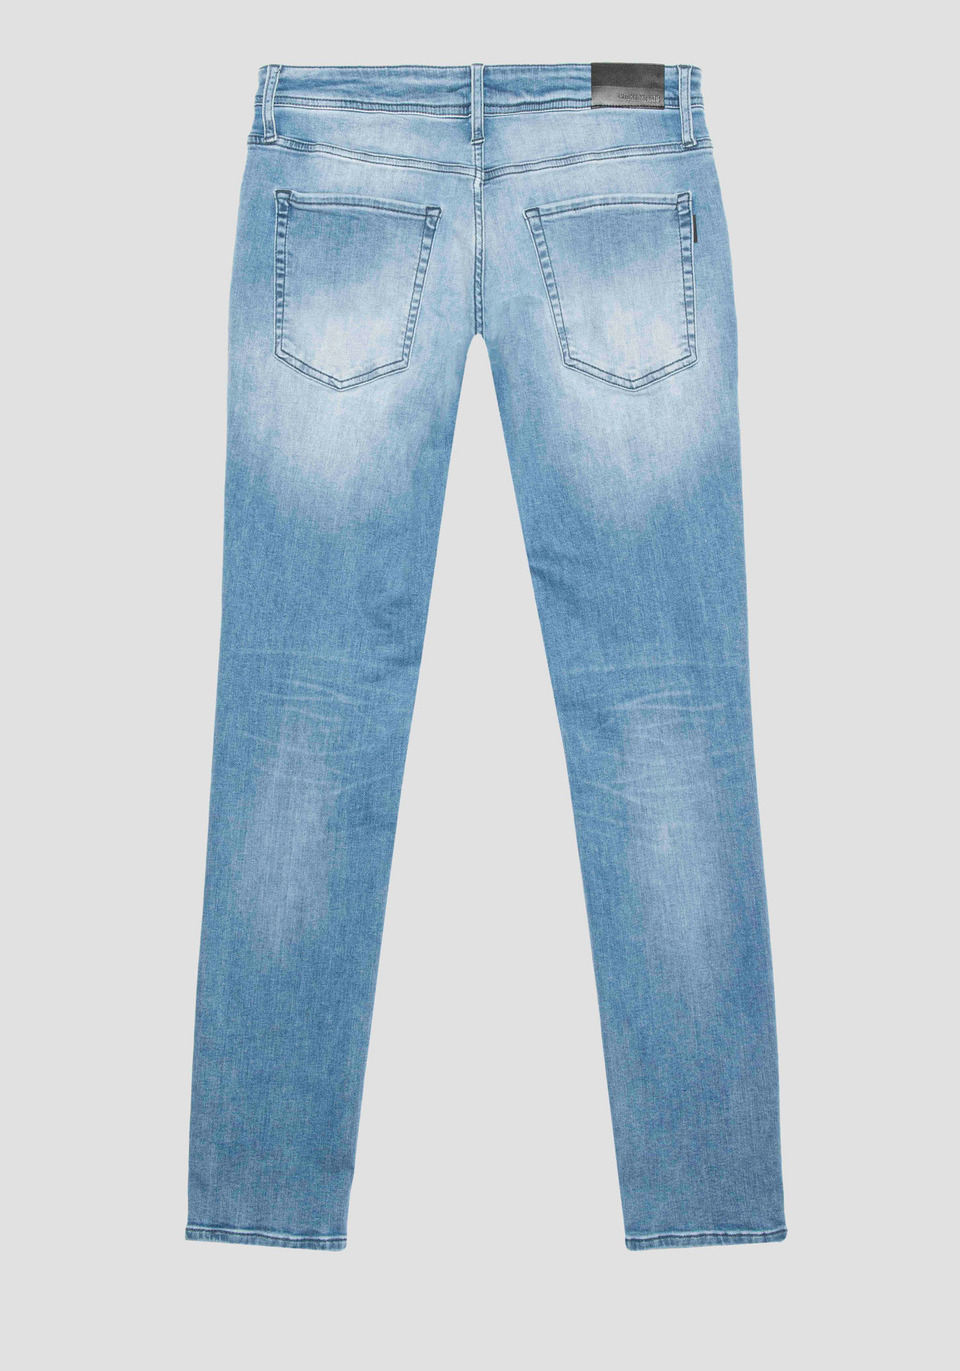 JEANS TAPERED FIT “OZZY” IN DENIM POWER STRETCH CON EFFETTO USED - Antony Morato Online Shop